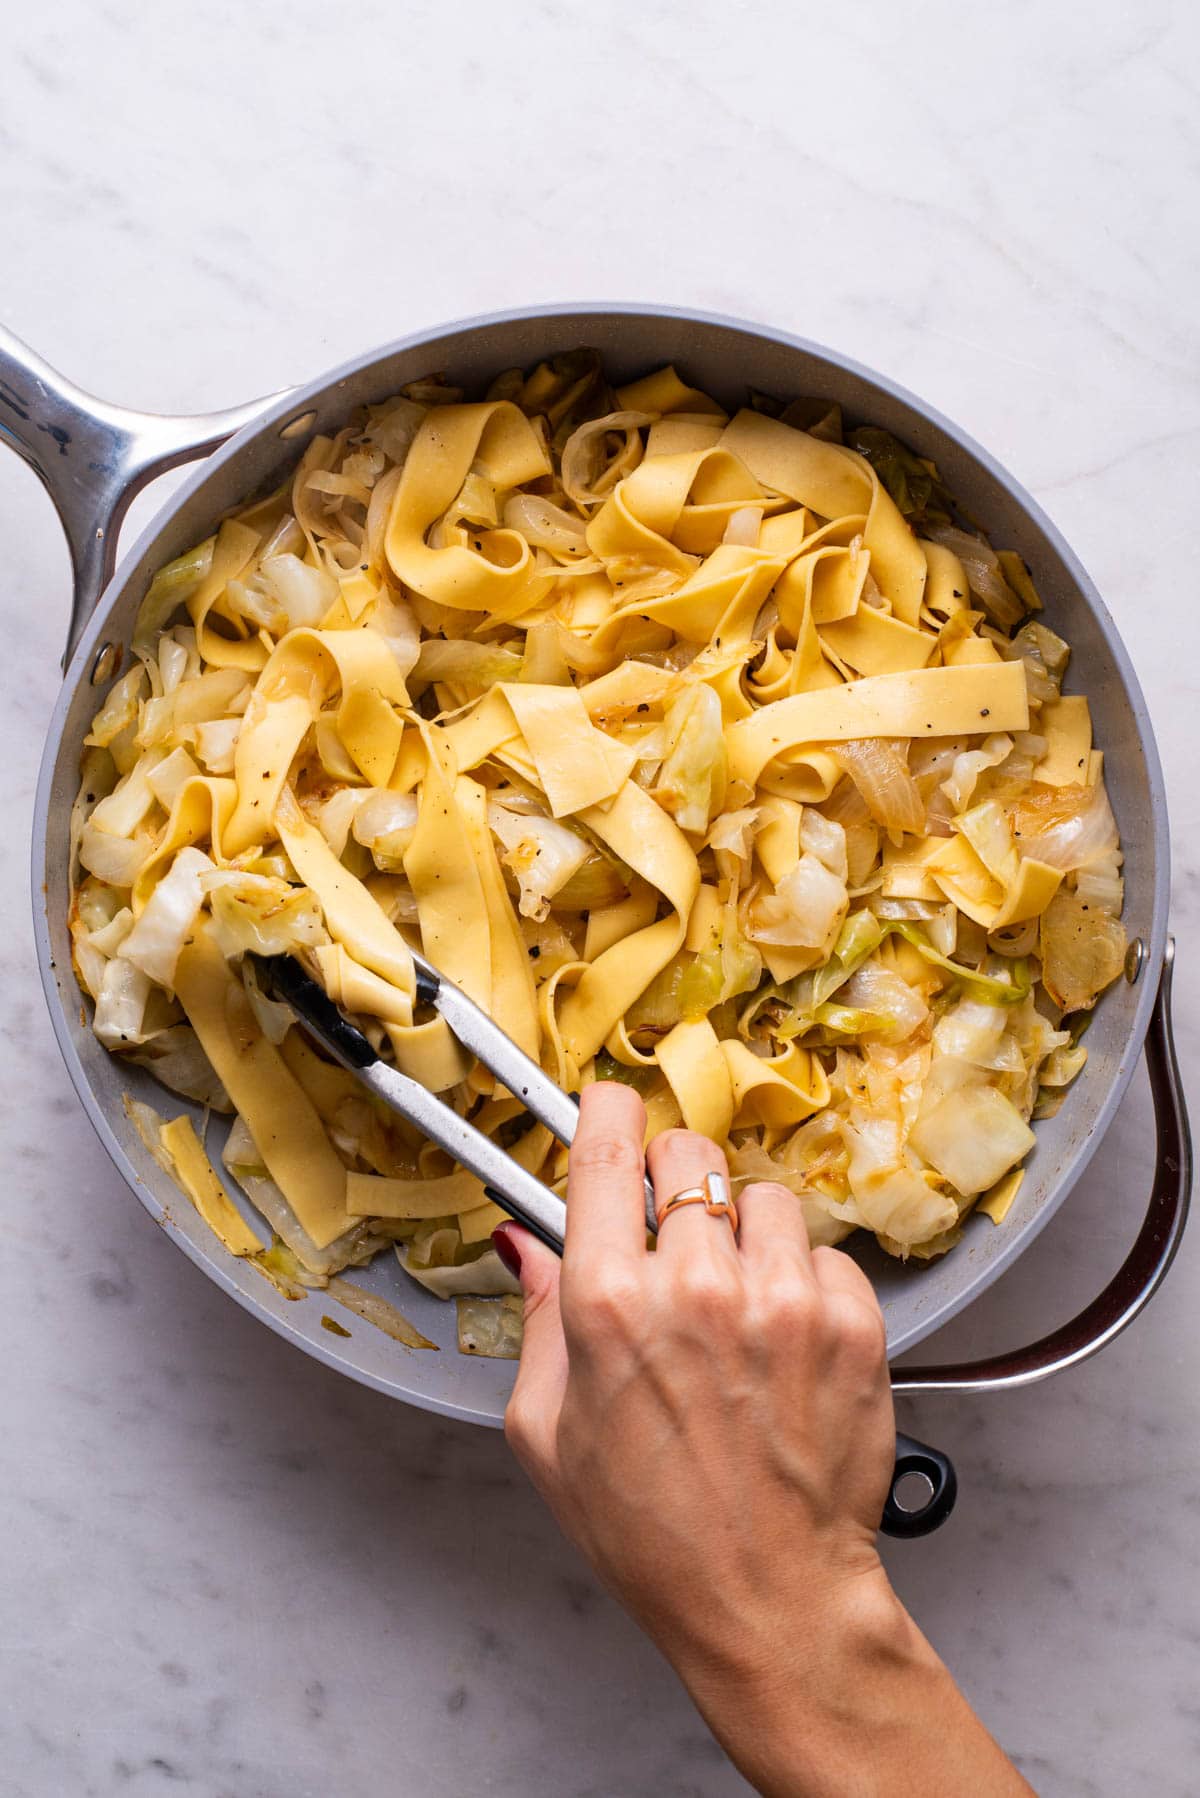 Tossing cooked pappardelle pasta through caramelized cabbage and onions.